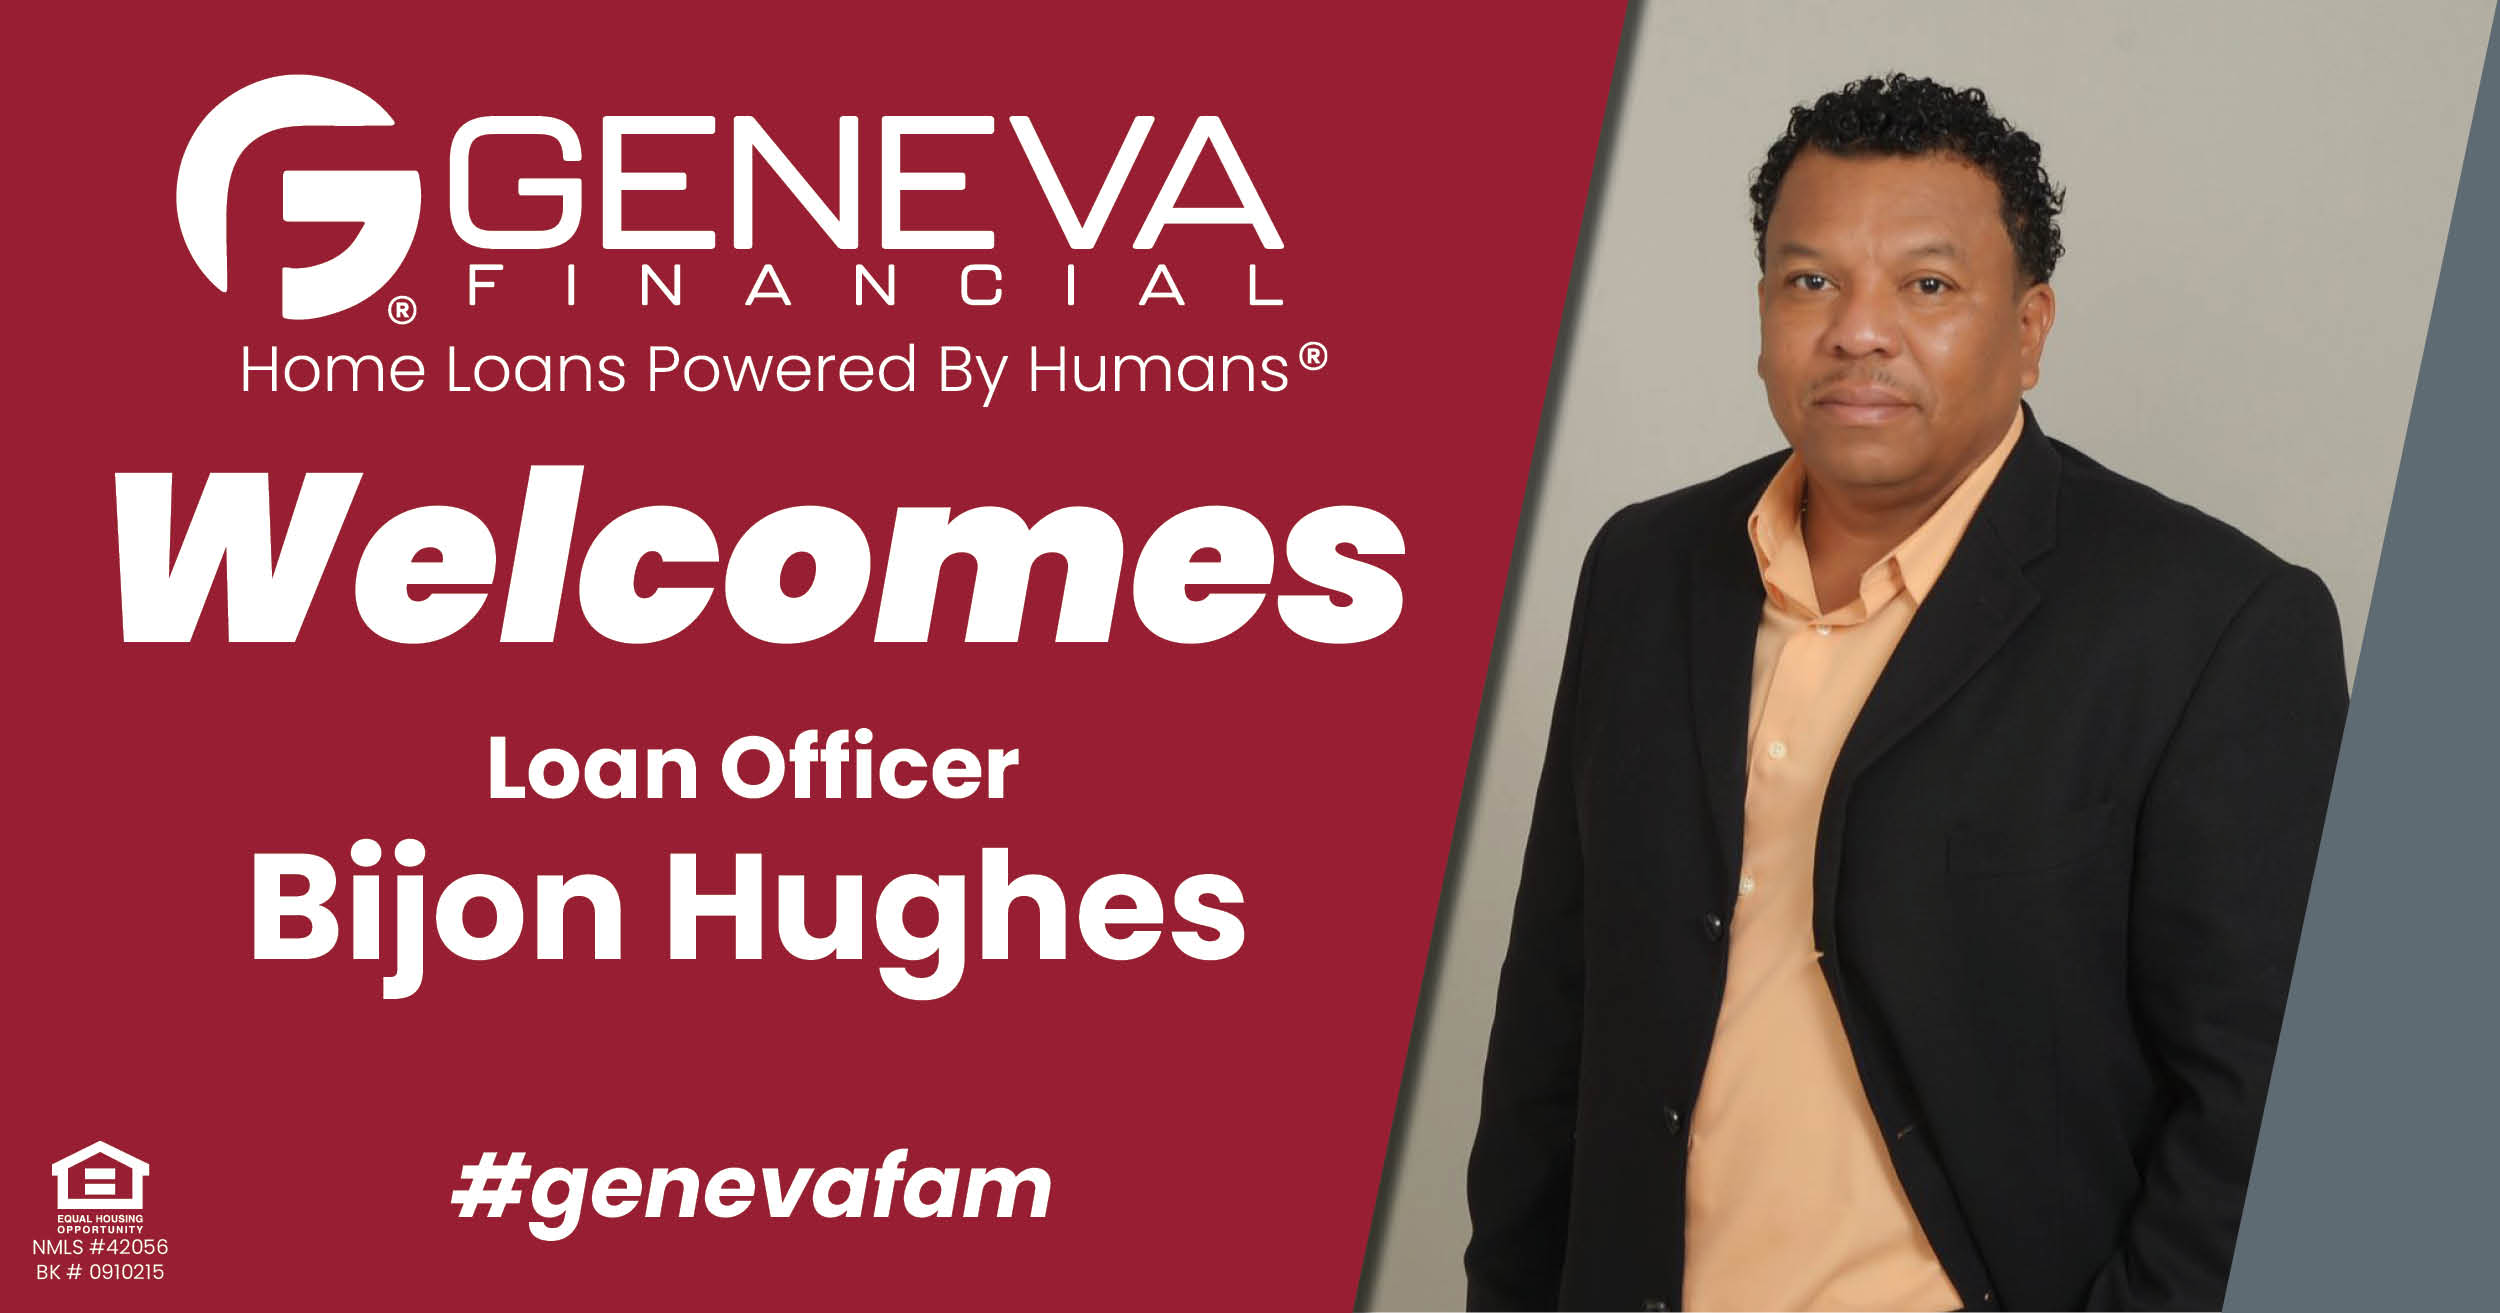 Geneva Financial Welcomes New Loan Officer Bijon Hughes to California – Home Loans Powered by Humans®.